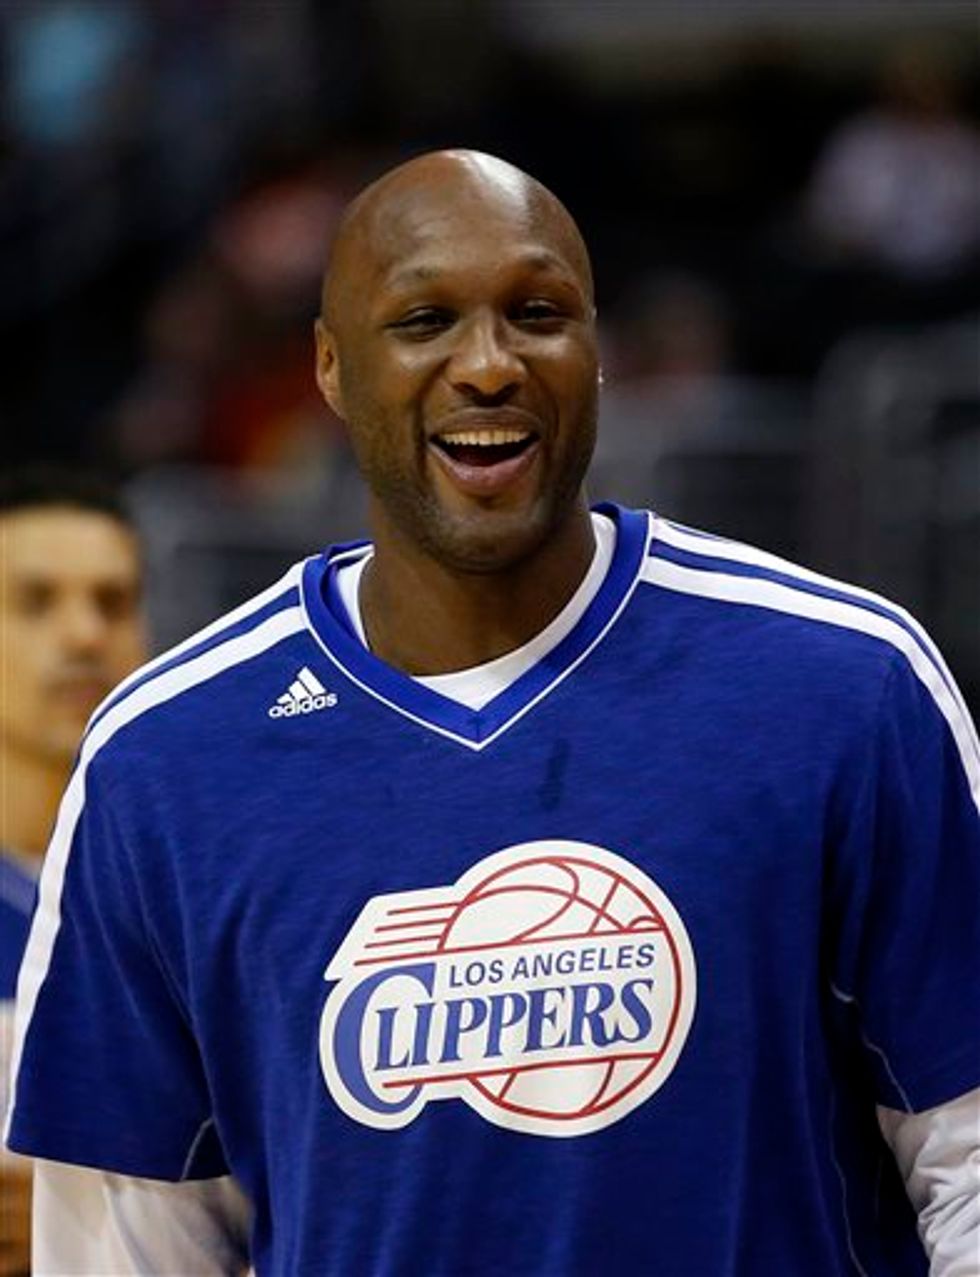 Lamar Odom Leaves Las Vegas Hospital a Week After Being Found Unconscious at Brothel